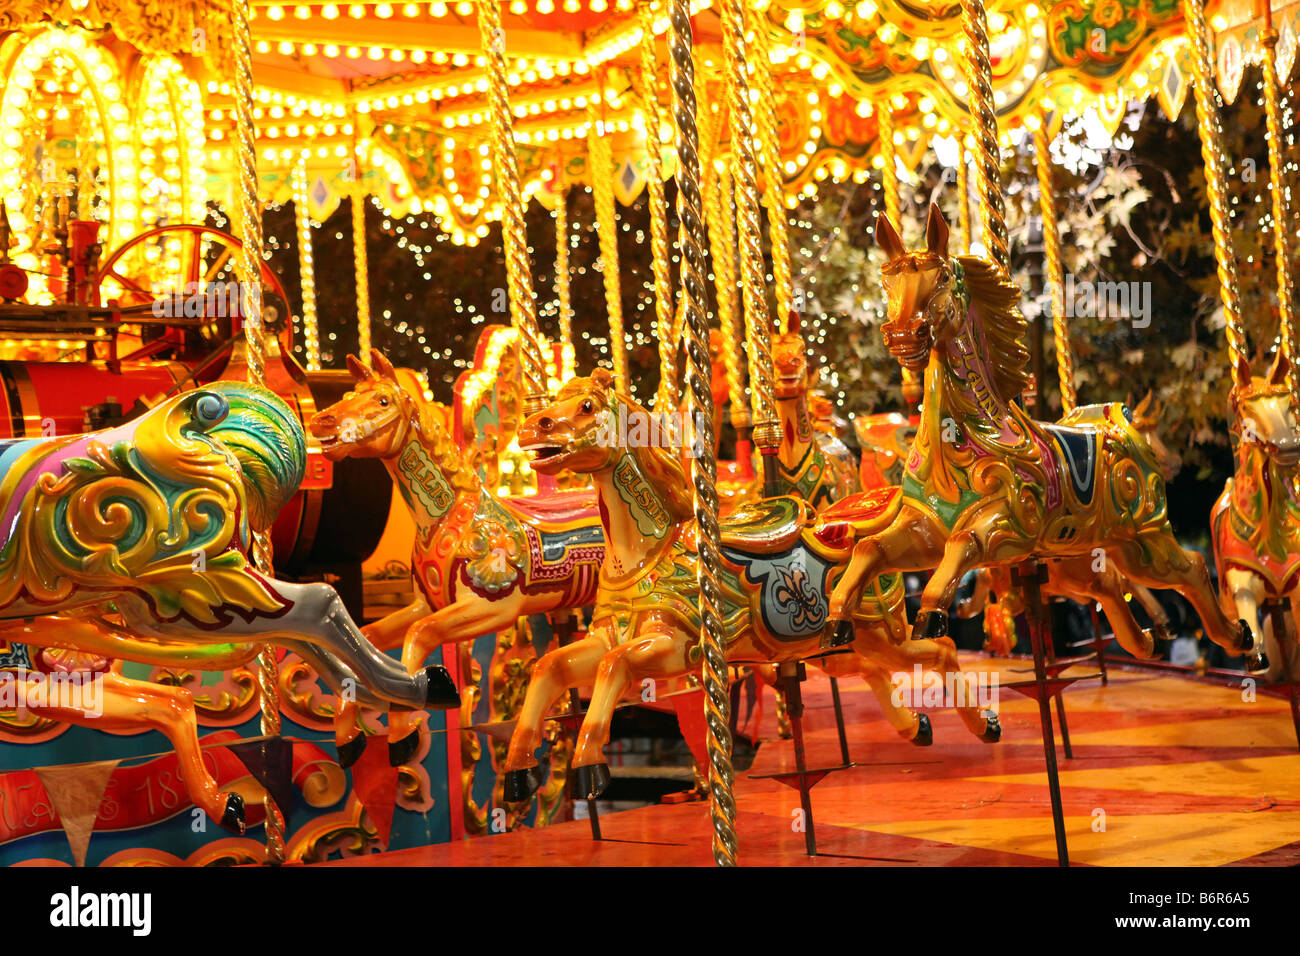 colorful carousel with lights at night Stock Photo